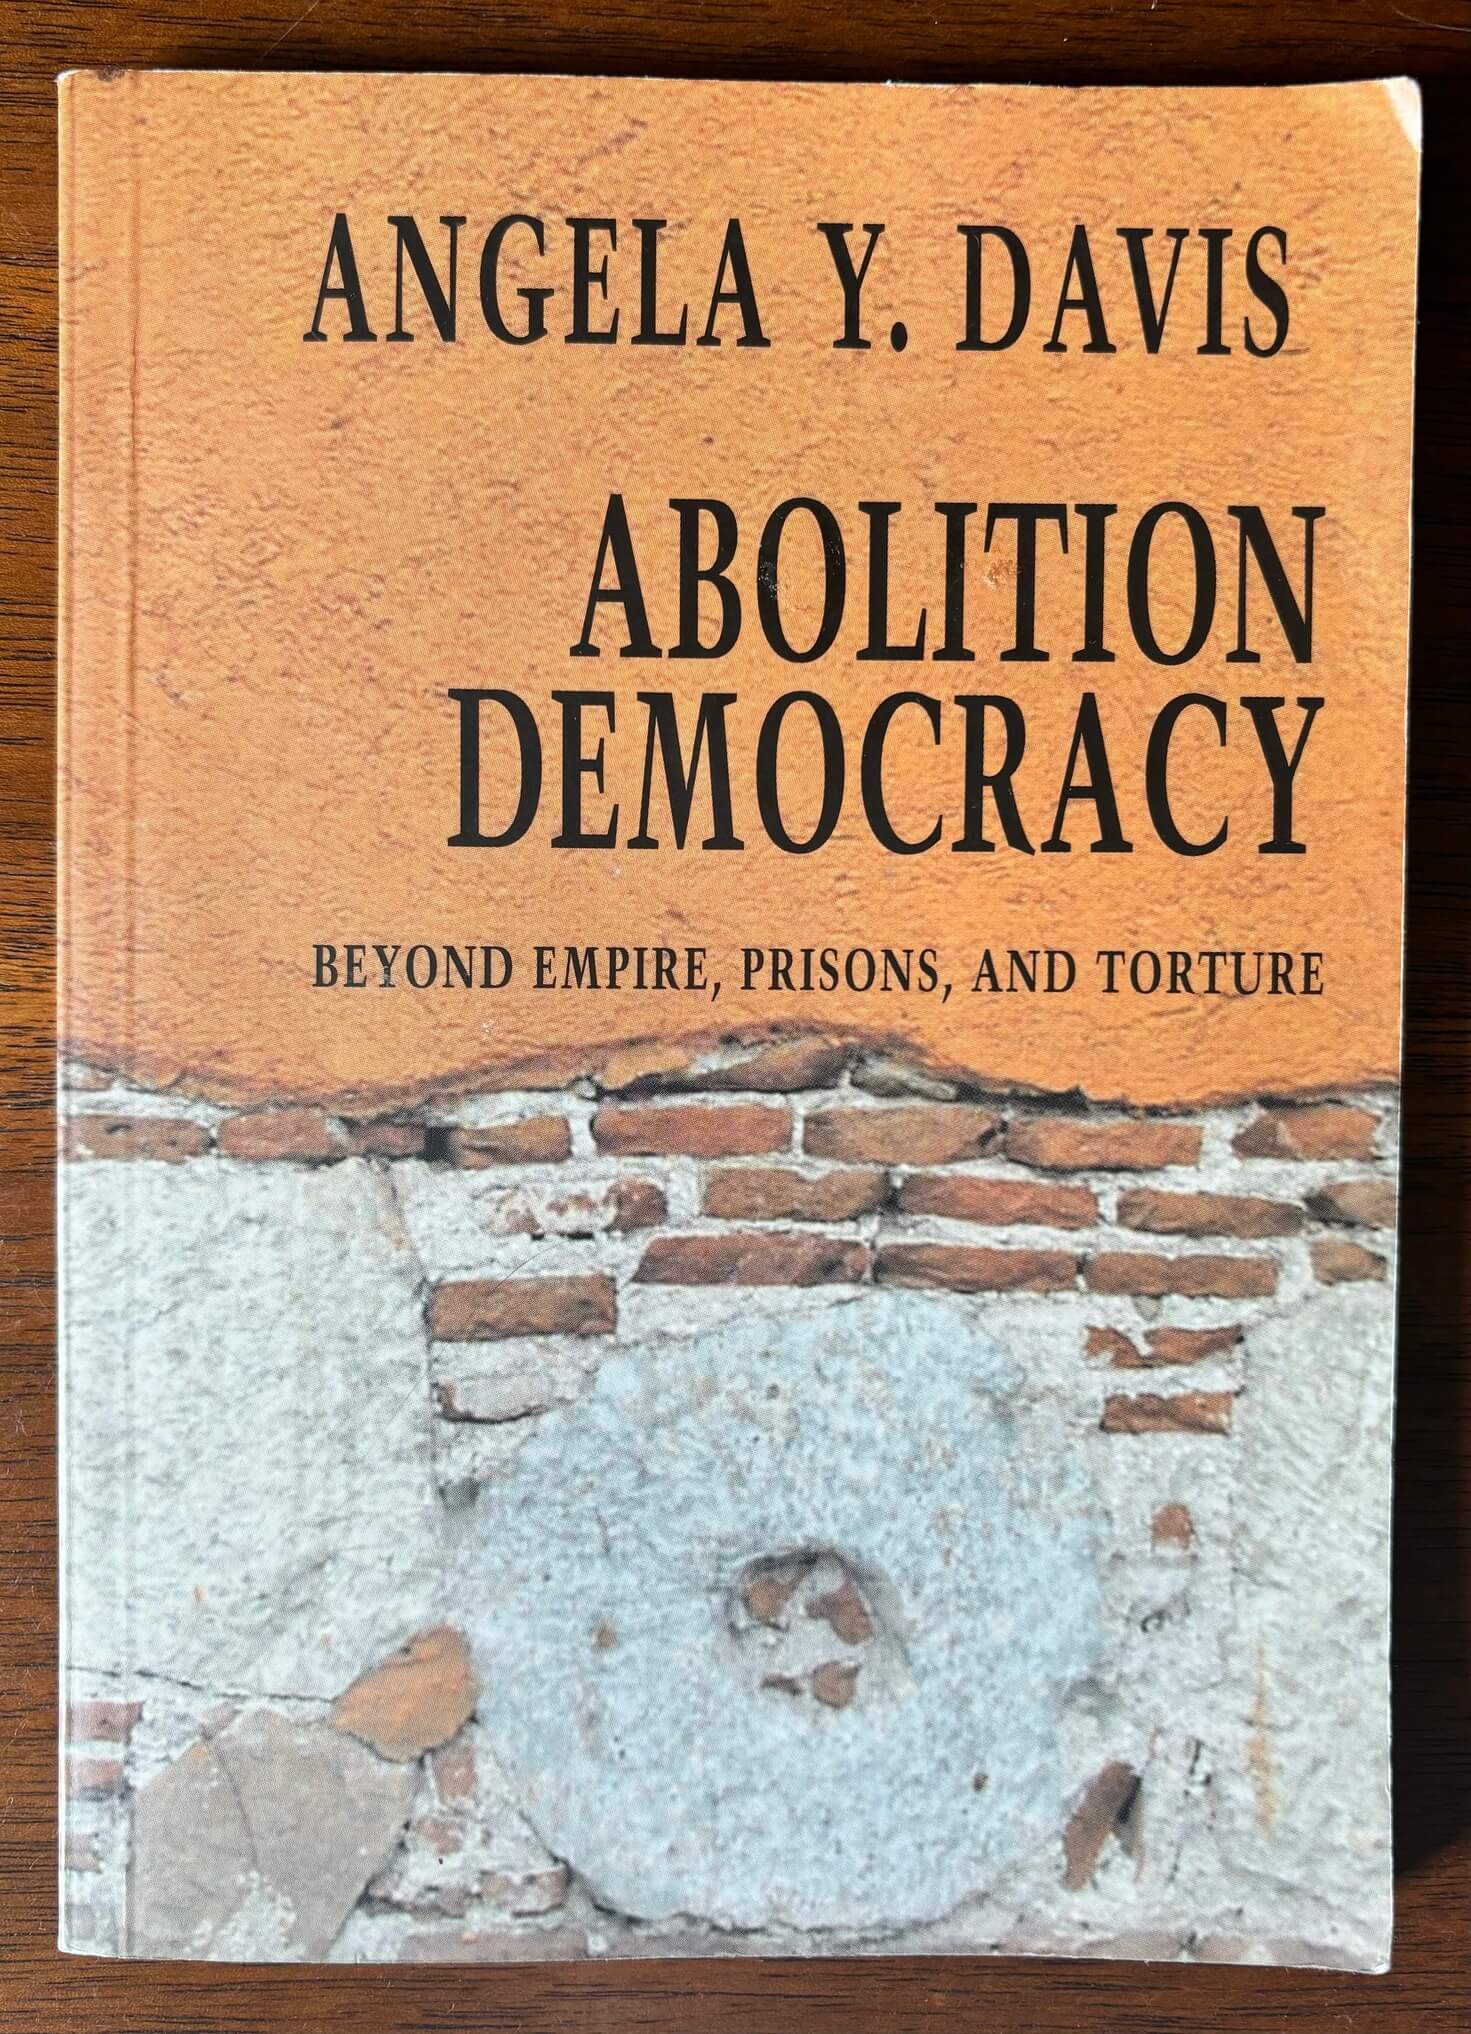 “Abolition Democracy: Beyond Empire, Prisons, and Torture” by Angela Y. Davis